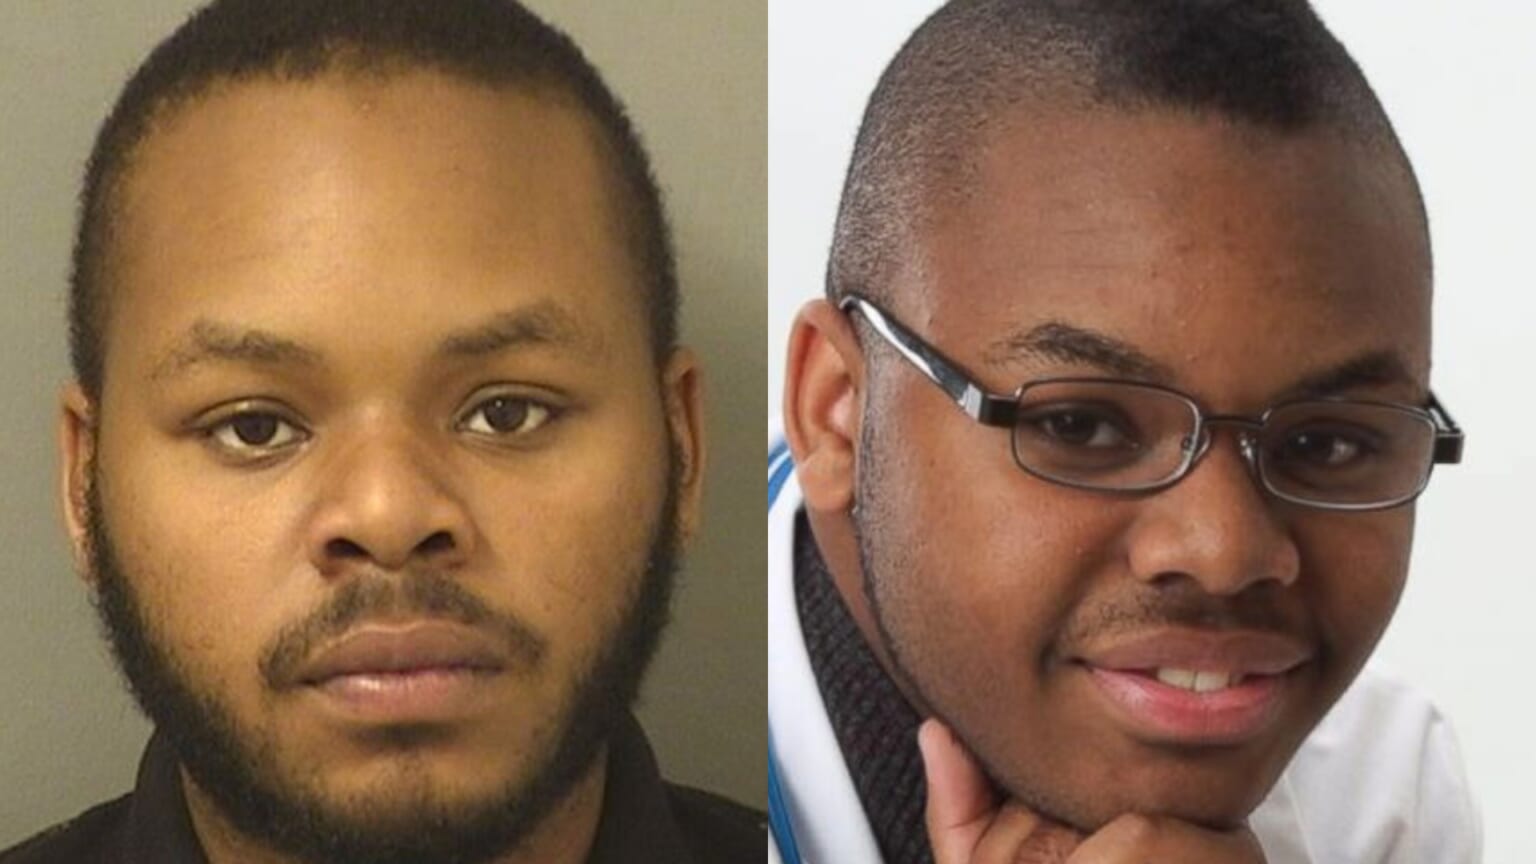 Fake Teen Doctor Now 23 Arrested For Fraud In Florida TheGrio TheGrio